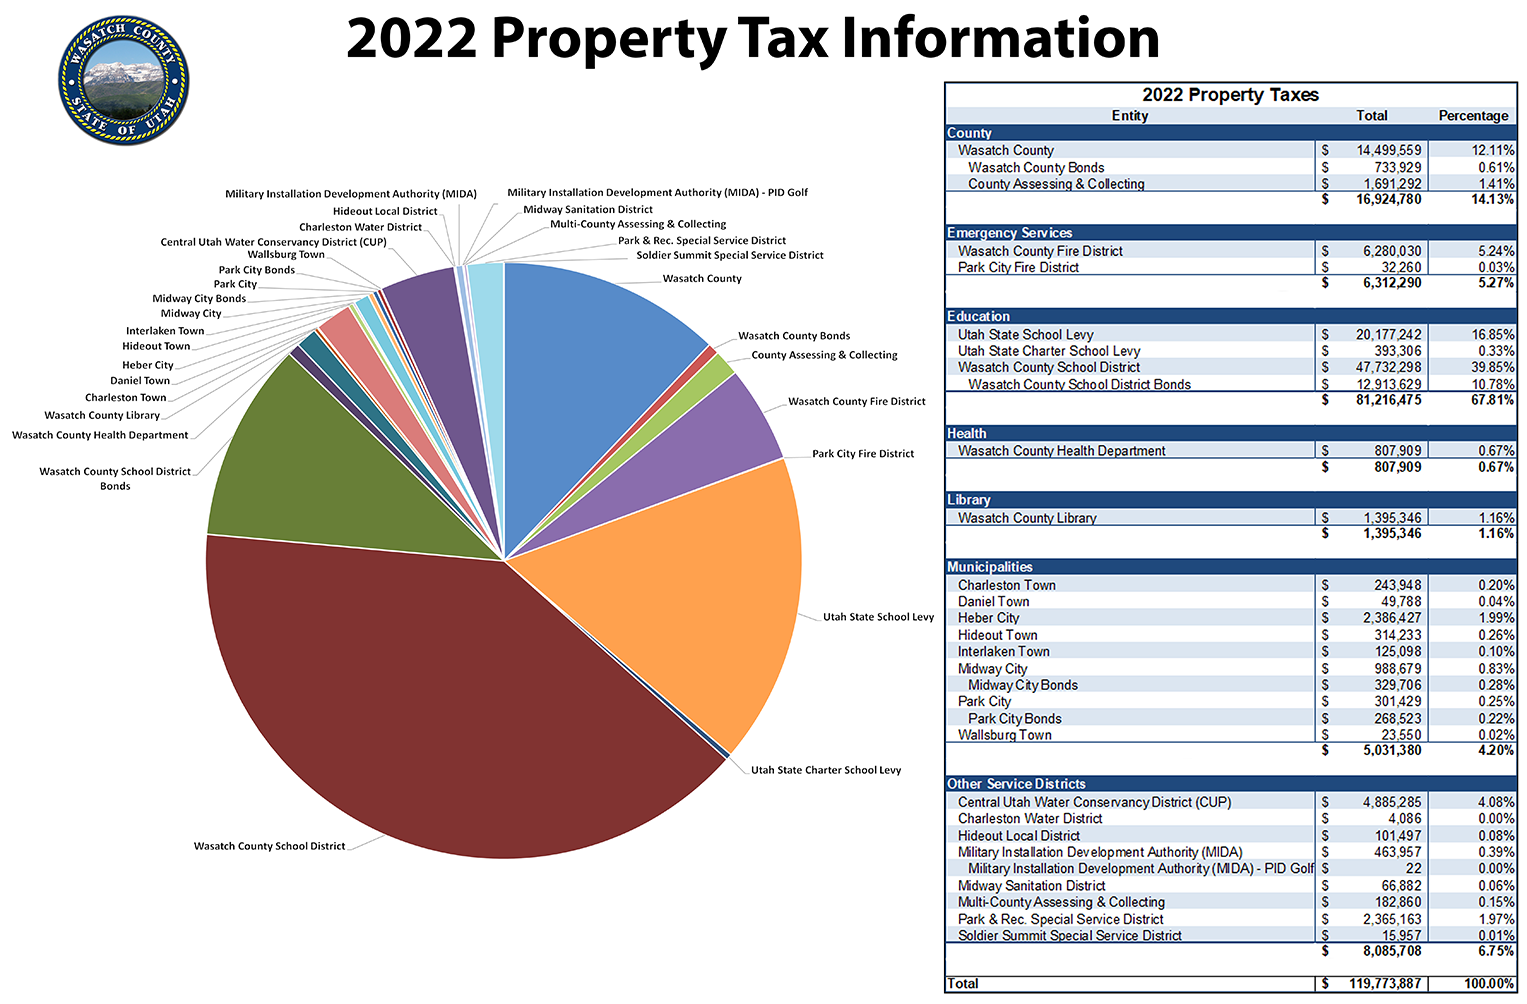 2022 Property Tax Entities